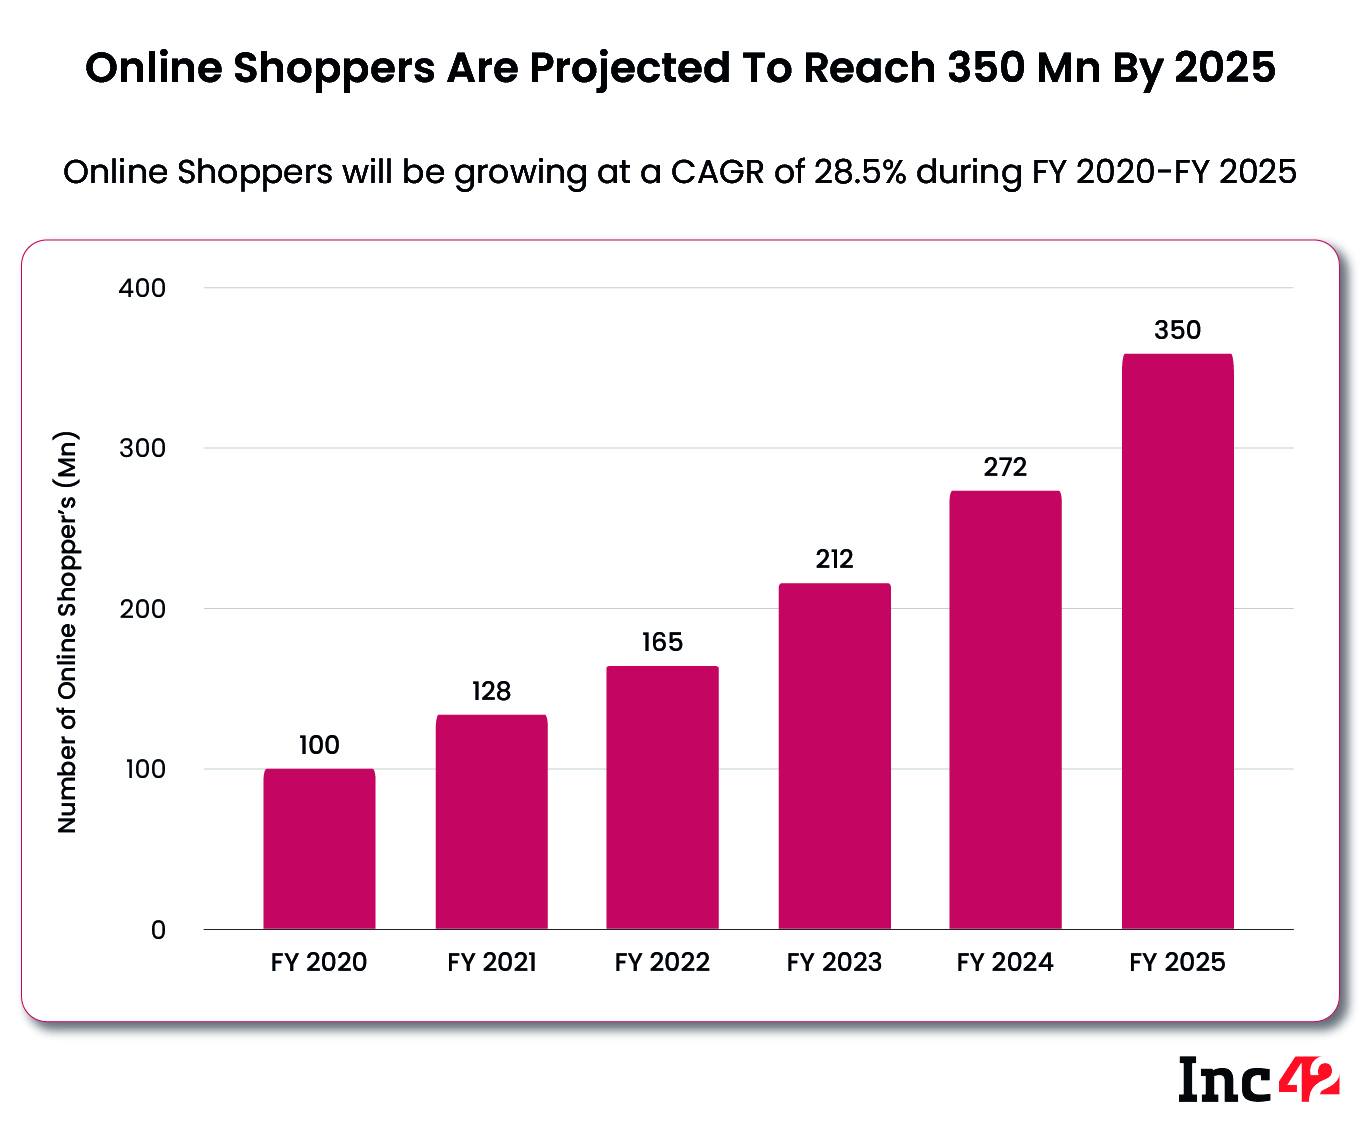 Online Shoppers Projected To Reach 300 Mn